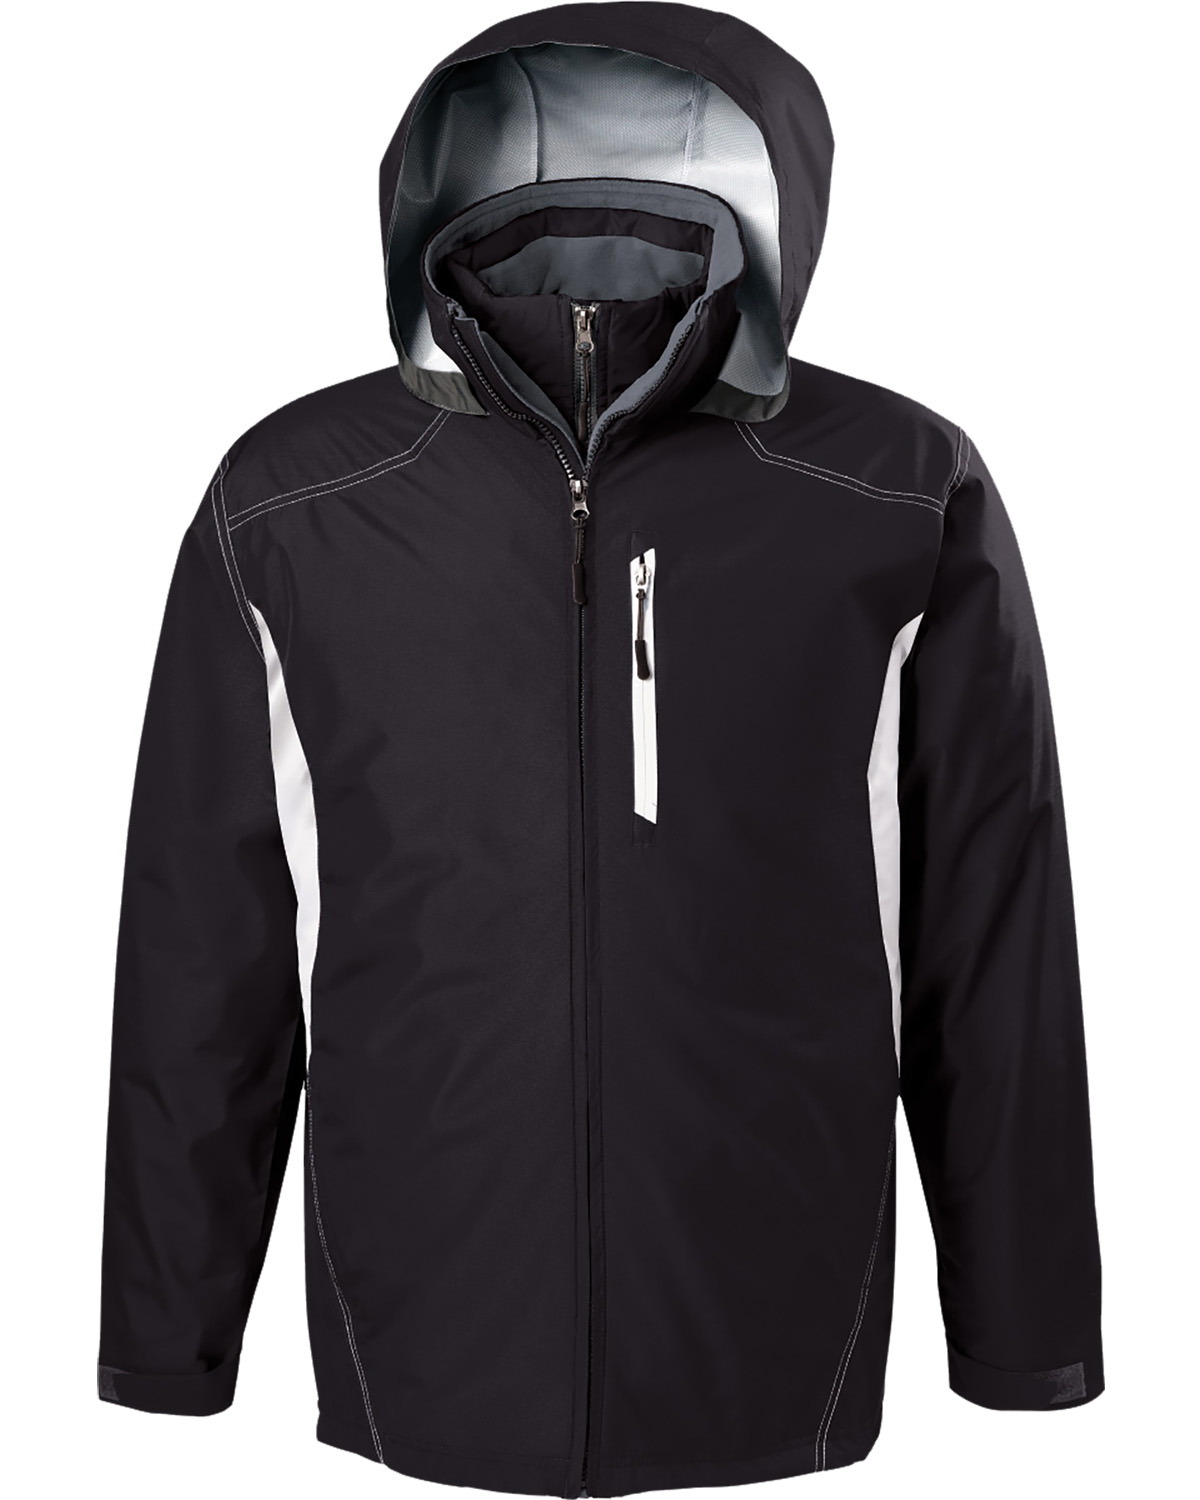 Holloway 229137 - Adult Polyester Full Zip Hooded Interval Jacket